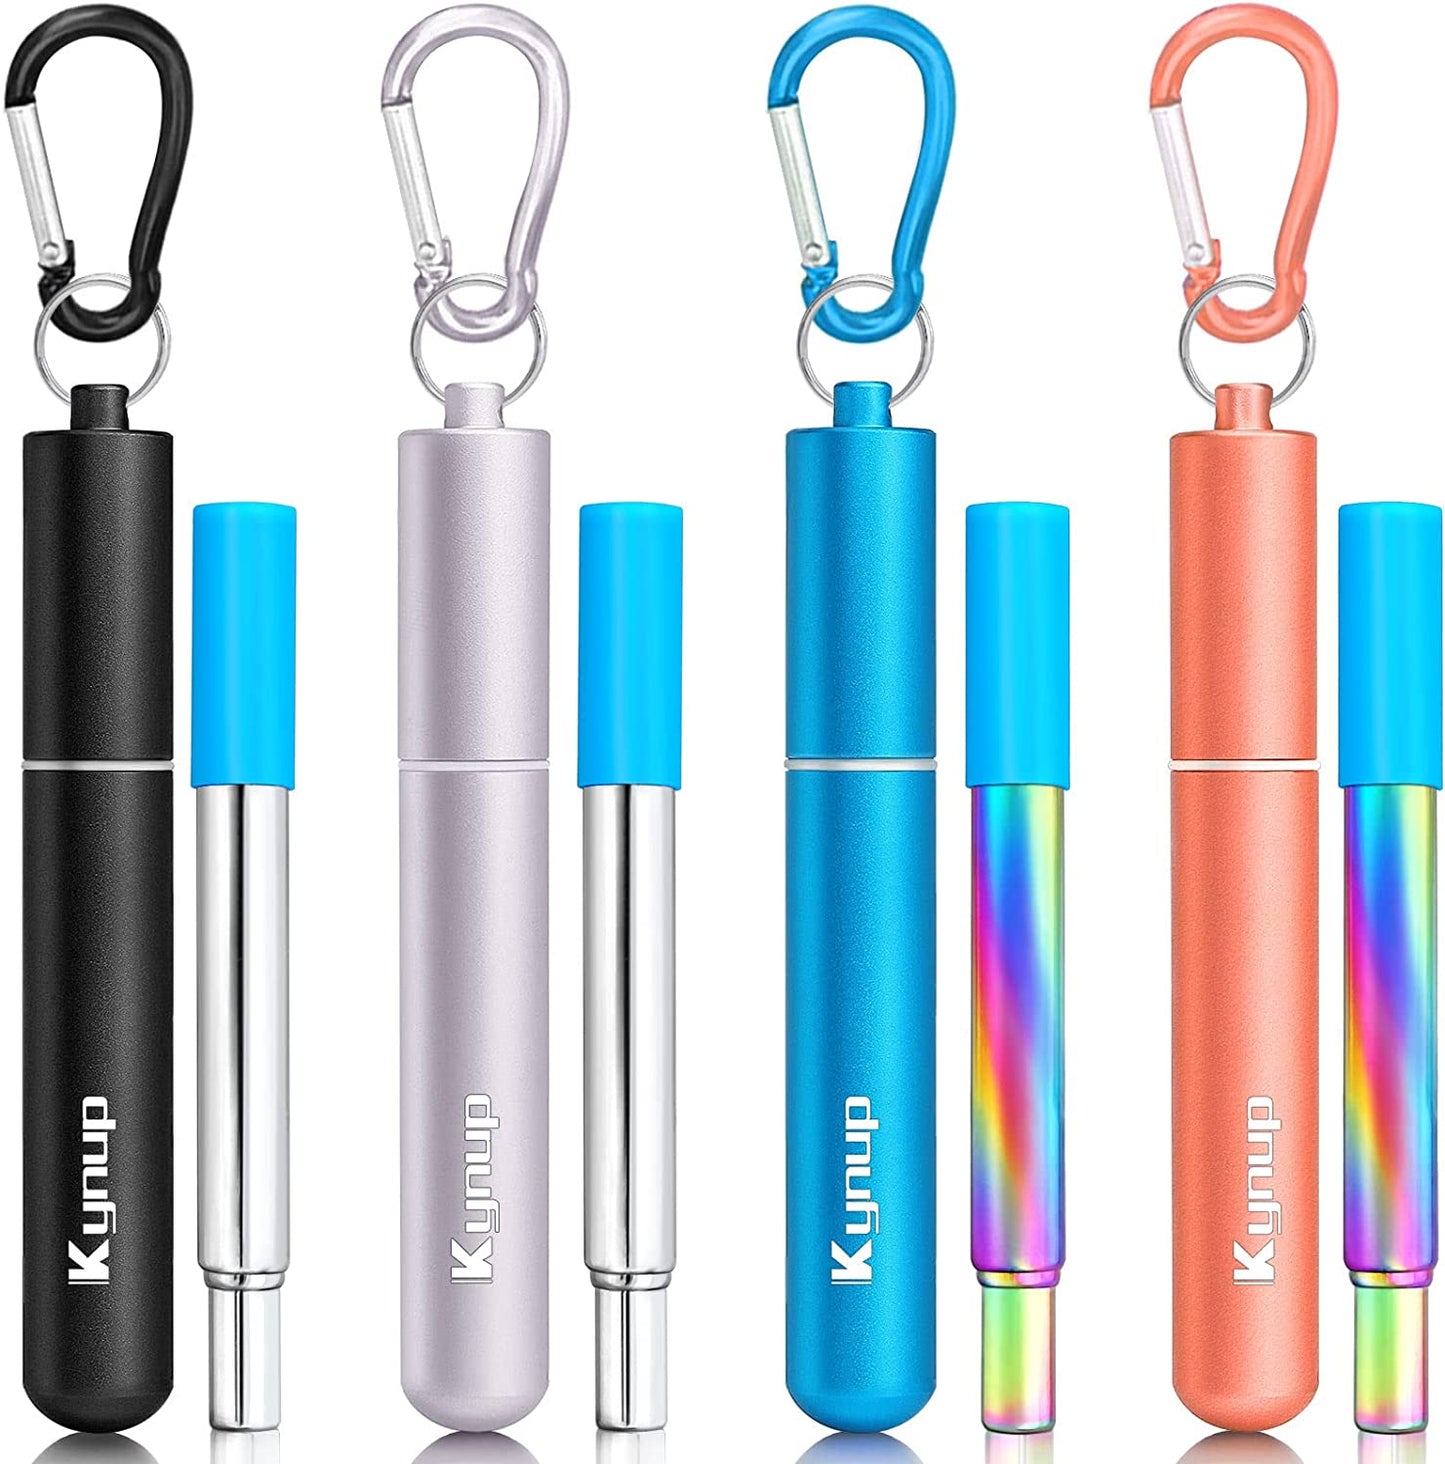 Reusable Straws, 4Pack Collapsible Portable Foldable Metal Straw Stainless Steel Drinking Travel Telescopic Straw with Case, Cleaning Brushes, Keychain Gifts (Blue-Black- Rose Gold-Silver)